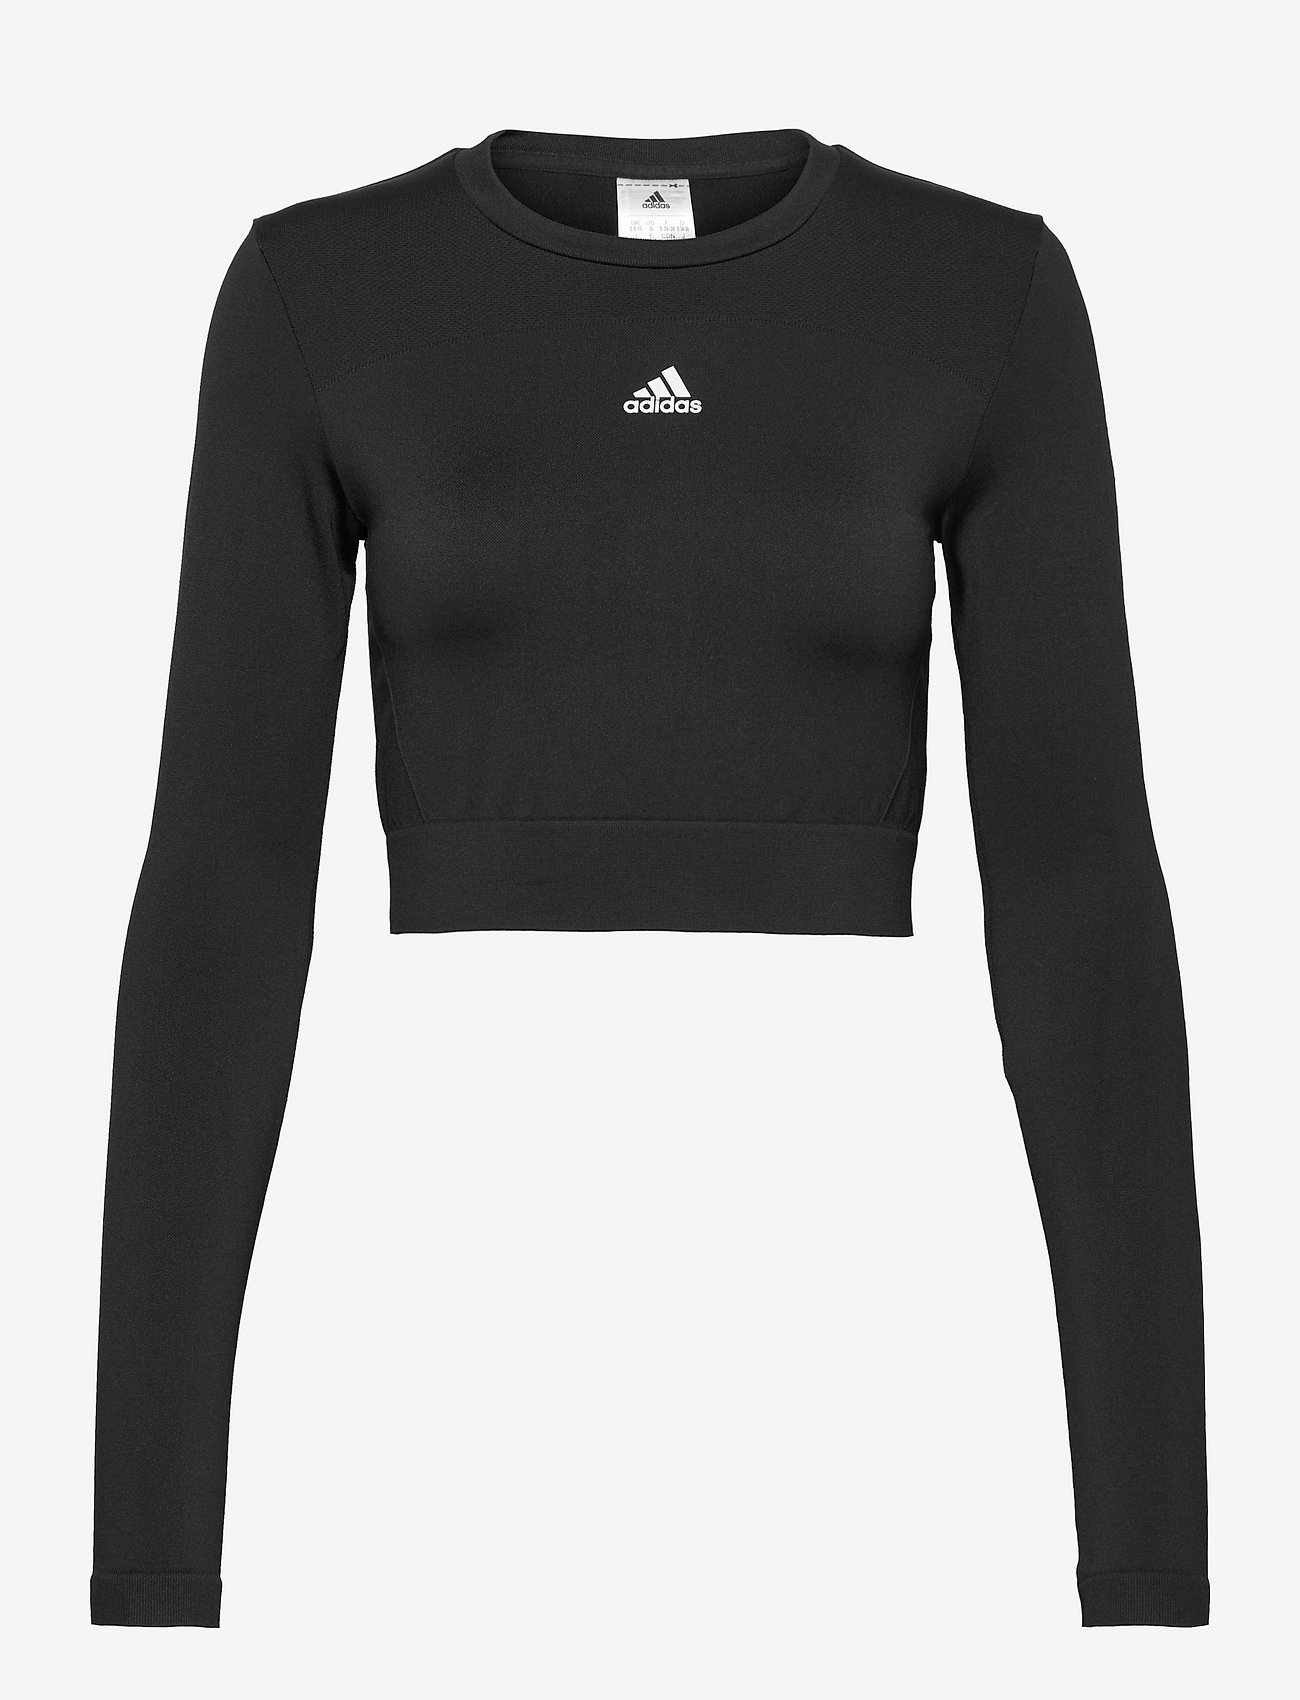 adidas Performance - adidas AEROKNIT Seamless Fitted Cropped Long-Sleeve Top - langærmede t-shirts - black/white - 0